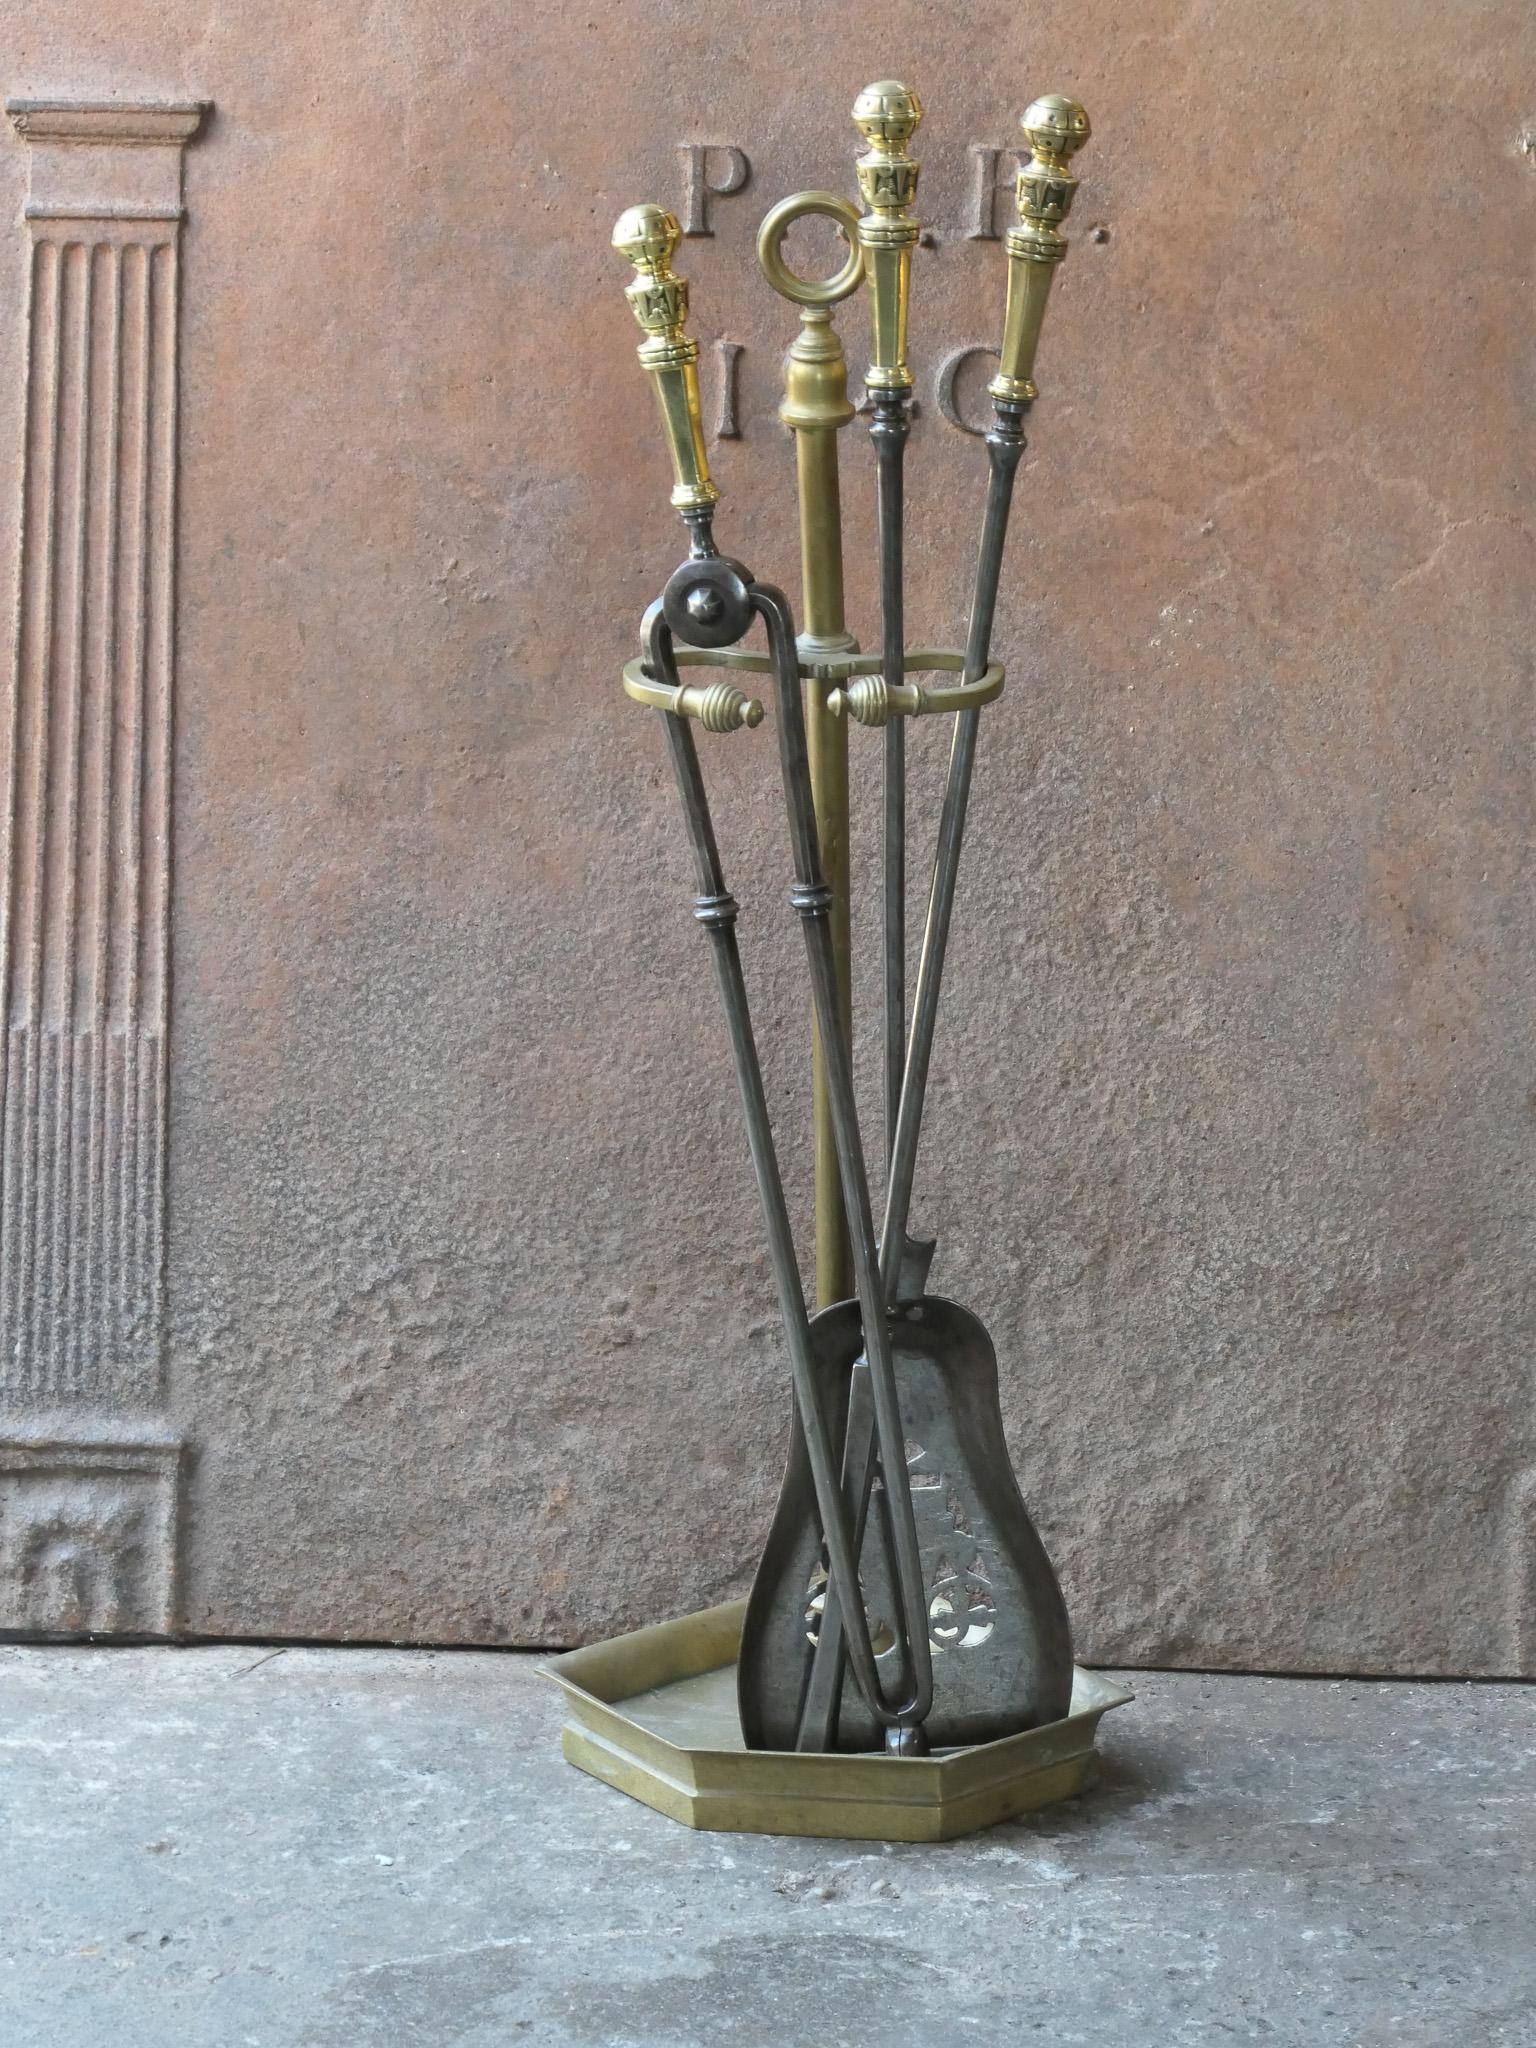 19th century English Victorian period fireplace toolset. The tools are made of wrought iron with brass handles, while the stand is made of brass. The toolset consists of tongs, poker, shovel and stand. The condition is good.








.